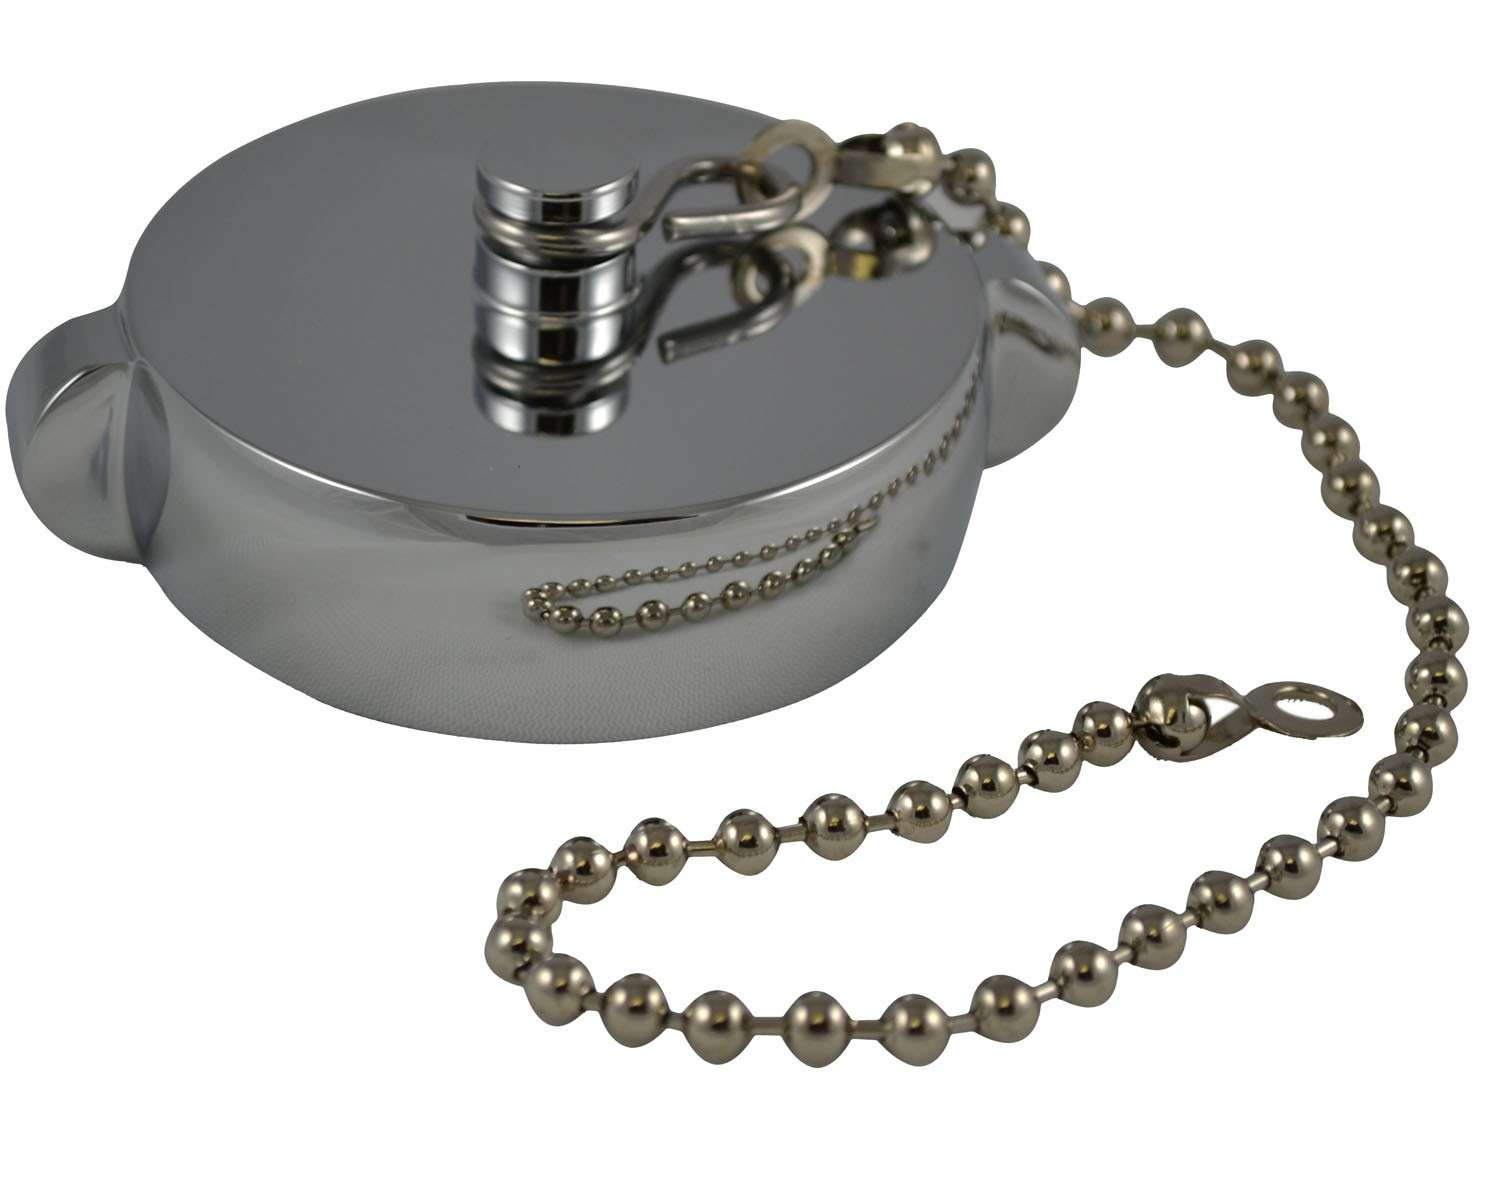 HCC28, 2.5 Customer Thread Female Cap Brass Chrome Plated with Chain, Rockerlug Tested to 500 psi